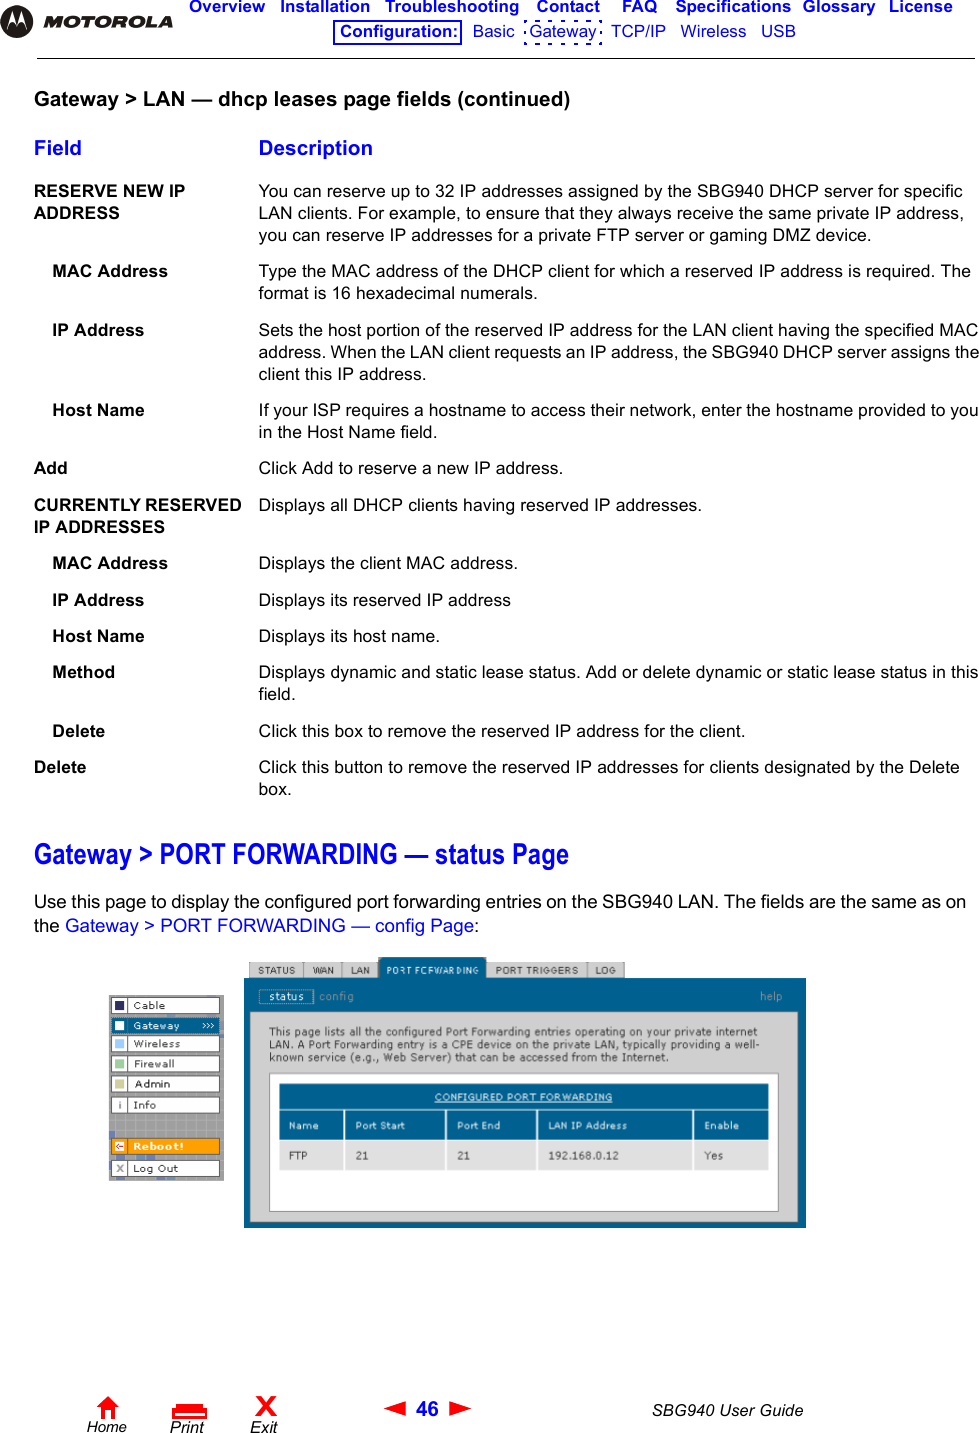 46 SBG940 User GuideHomeXExitPrintOverview Installation Troubleshooting Contact FAQ Specifications Glossary LicenseConfiguration:   Basic   Gateway   TCP/IP   Wireless   USB   Gateway &gt; PORT FORWARDING — status PageUse this page to display the configured port forwarding entries on the SBG940 LAN. The fields are the same as on the Gateway &gt; PORT FORWARDING — config Page:RESERVE NEW IP ADDRESS You can reserve up to 32 IP addresses assigned by the SBG940 DHCP server for specific LAN clients. For example, to ensure that they always receive the same private IP address, you can reserve IP addresses for a private FTP server or gaming DMZ device.MAC Address Type the MAC address of the DHCP client for which a reserved IP address is required. The format is 16 hexadecimal numerals. IP Address Sets the host portion of the reserved IP address for the LAN client having the specified MAC address. When the LAN client requests an IP address, the SBG940 DHCP server assigns the client this IP address.Host Name If your ISP requires a hostname to access their network, enter the hostname provided to you in the Host Name field.Add Click Add to reserve a new IP address.CURRENTLY RESERVED IP ADDRESSESDisplays all DHCP clients having reserved IP addresses.MAC Address Displays the client MAC address.IP Address Displays its reserved IP addressHost Name Displays its host name.Method Displays dynamic and static lease status. Add or delete dynamic or static lease status in this field.Delete Click this box to remove the reserved IP address for the client. Delete Click this button to remove the reserved IP addresses for clients designated by the Delete box.Gateway &gt; LAN — dhcp leases page fields (continued)Field Description